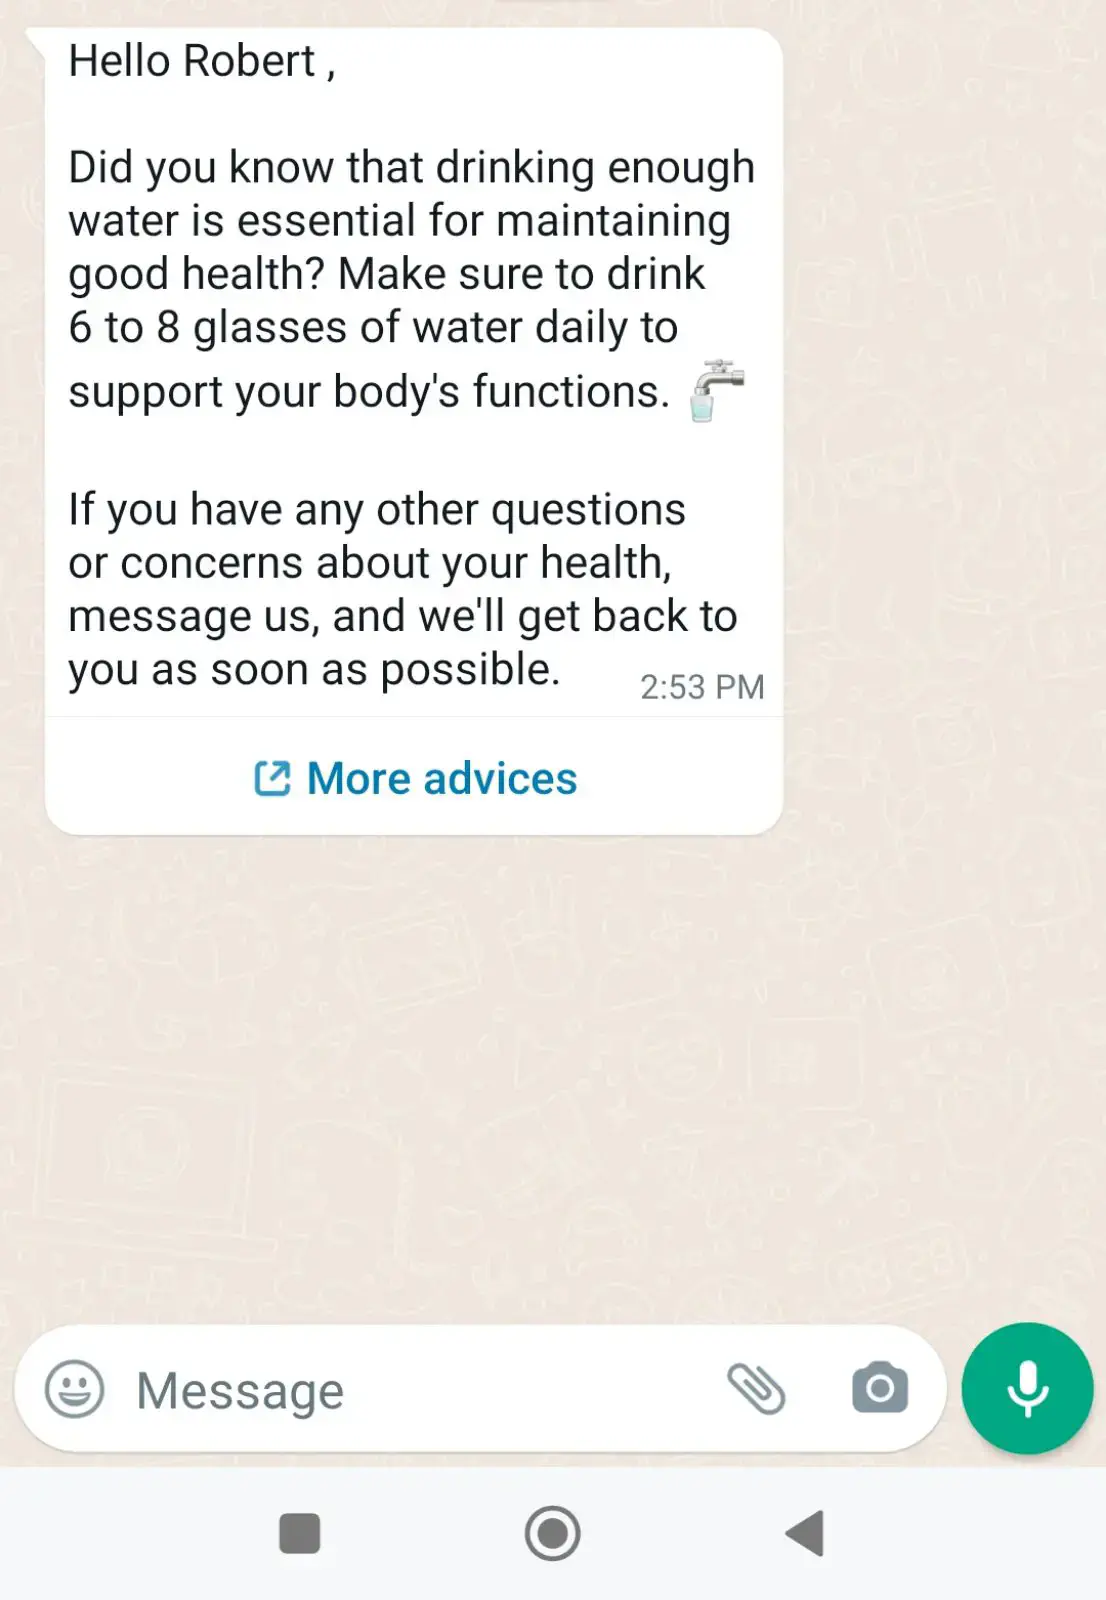 WhatsApp message with nutritional tips